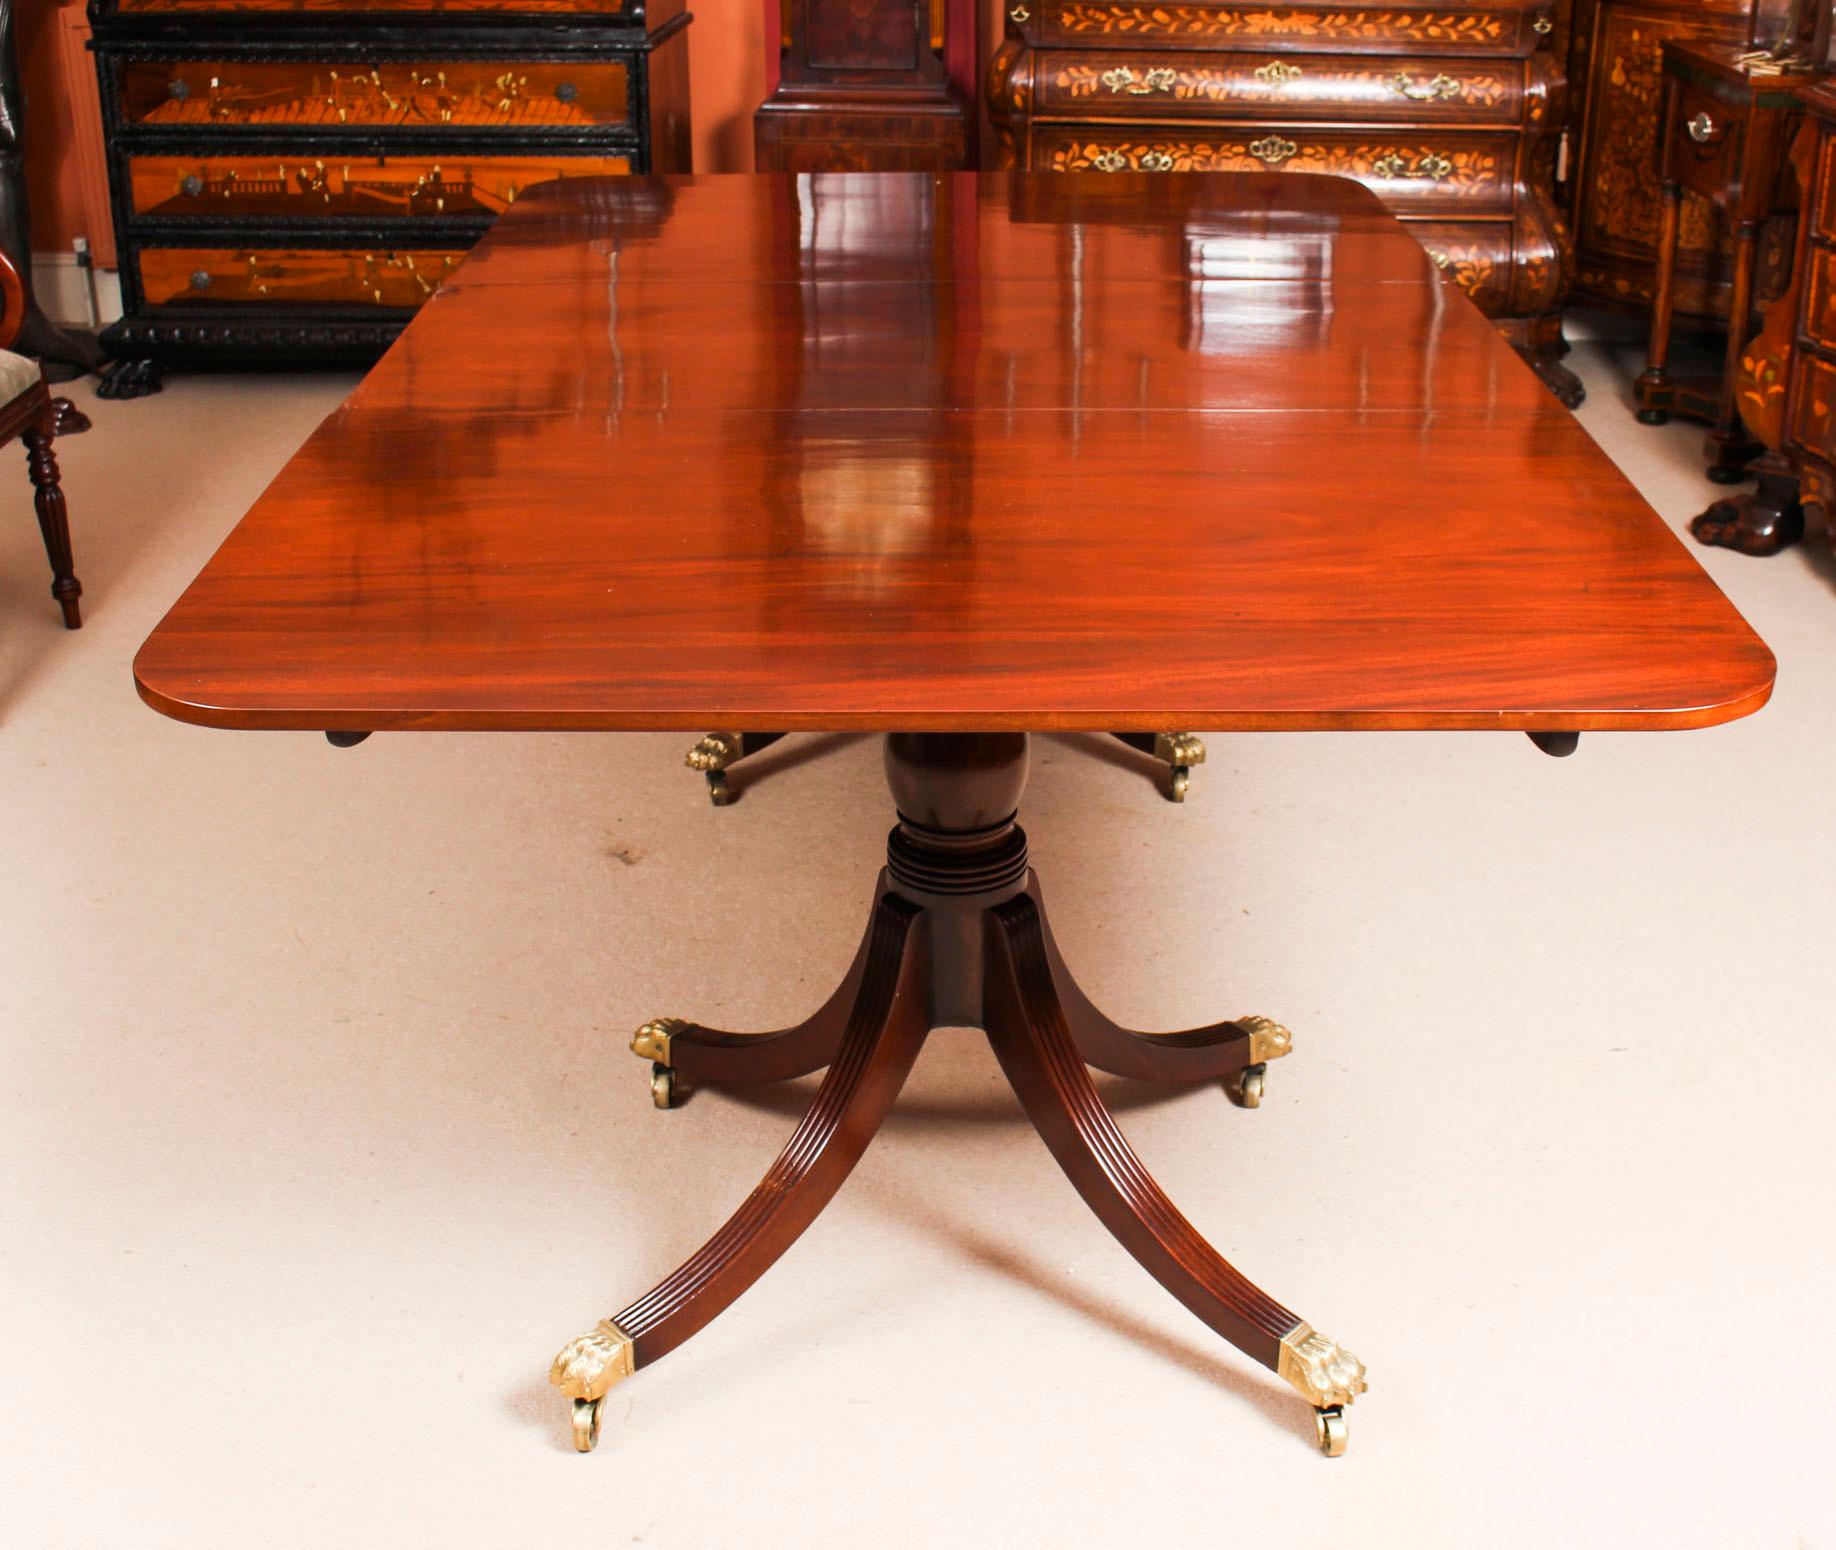 Mahogany Antique Twin Pillar Regency Dining Table 19th Century and 8 Bespoke Chairs